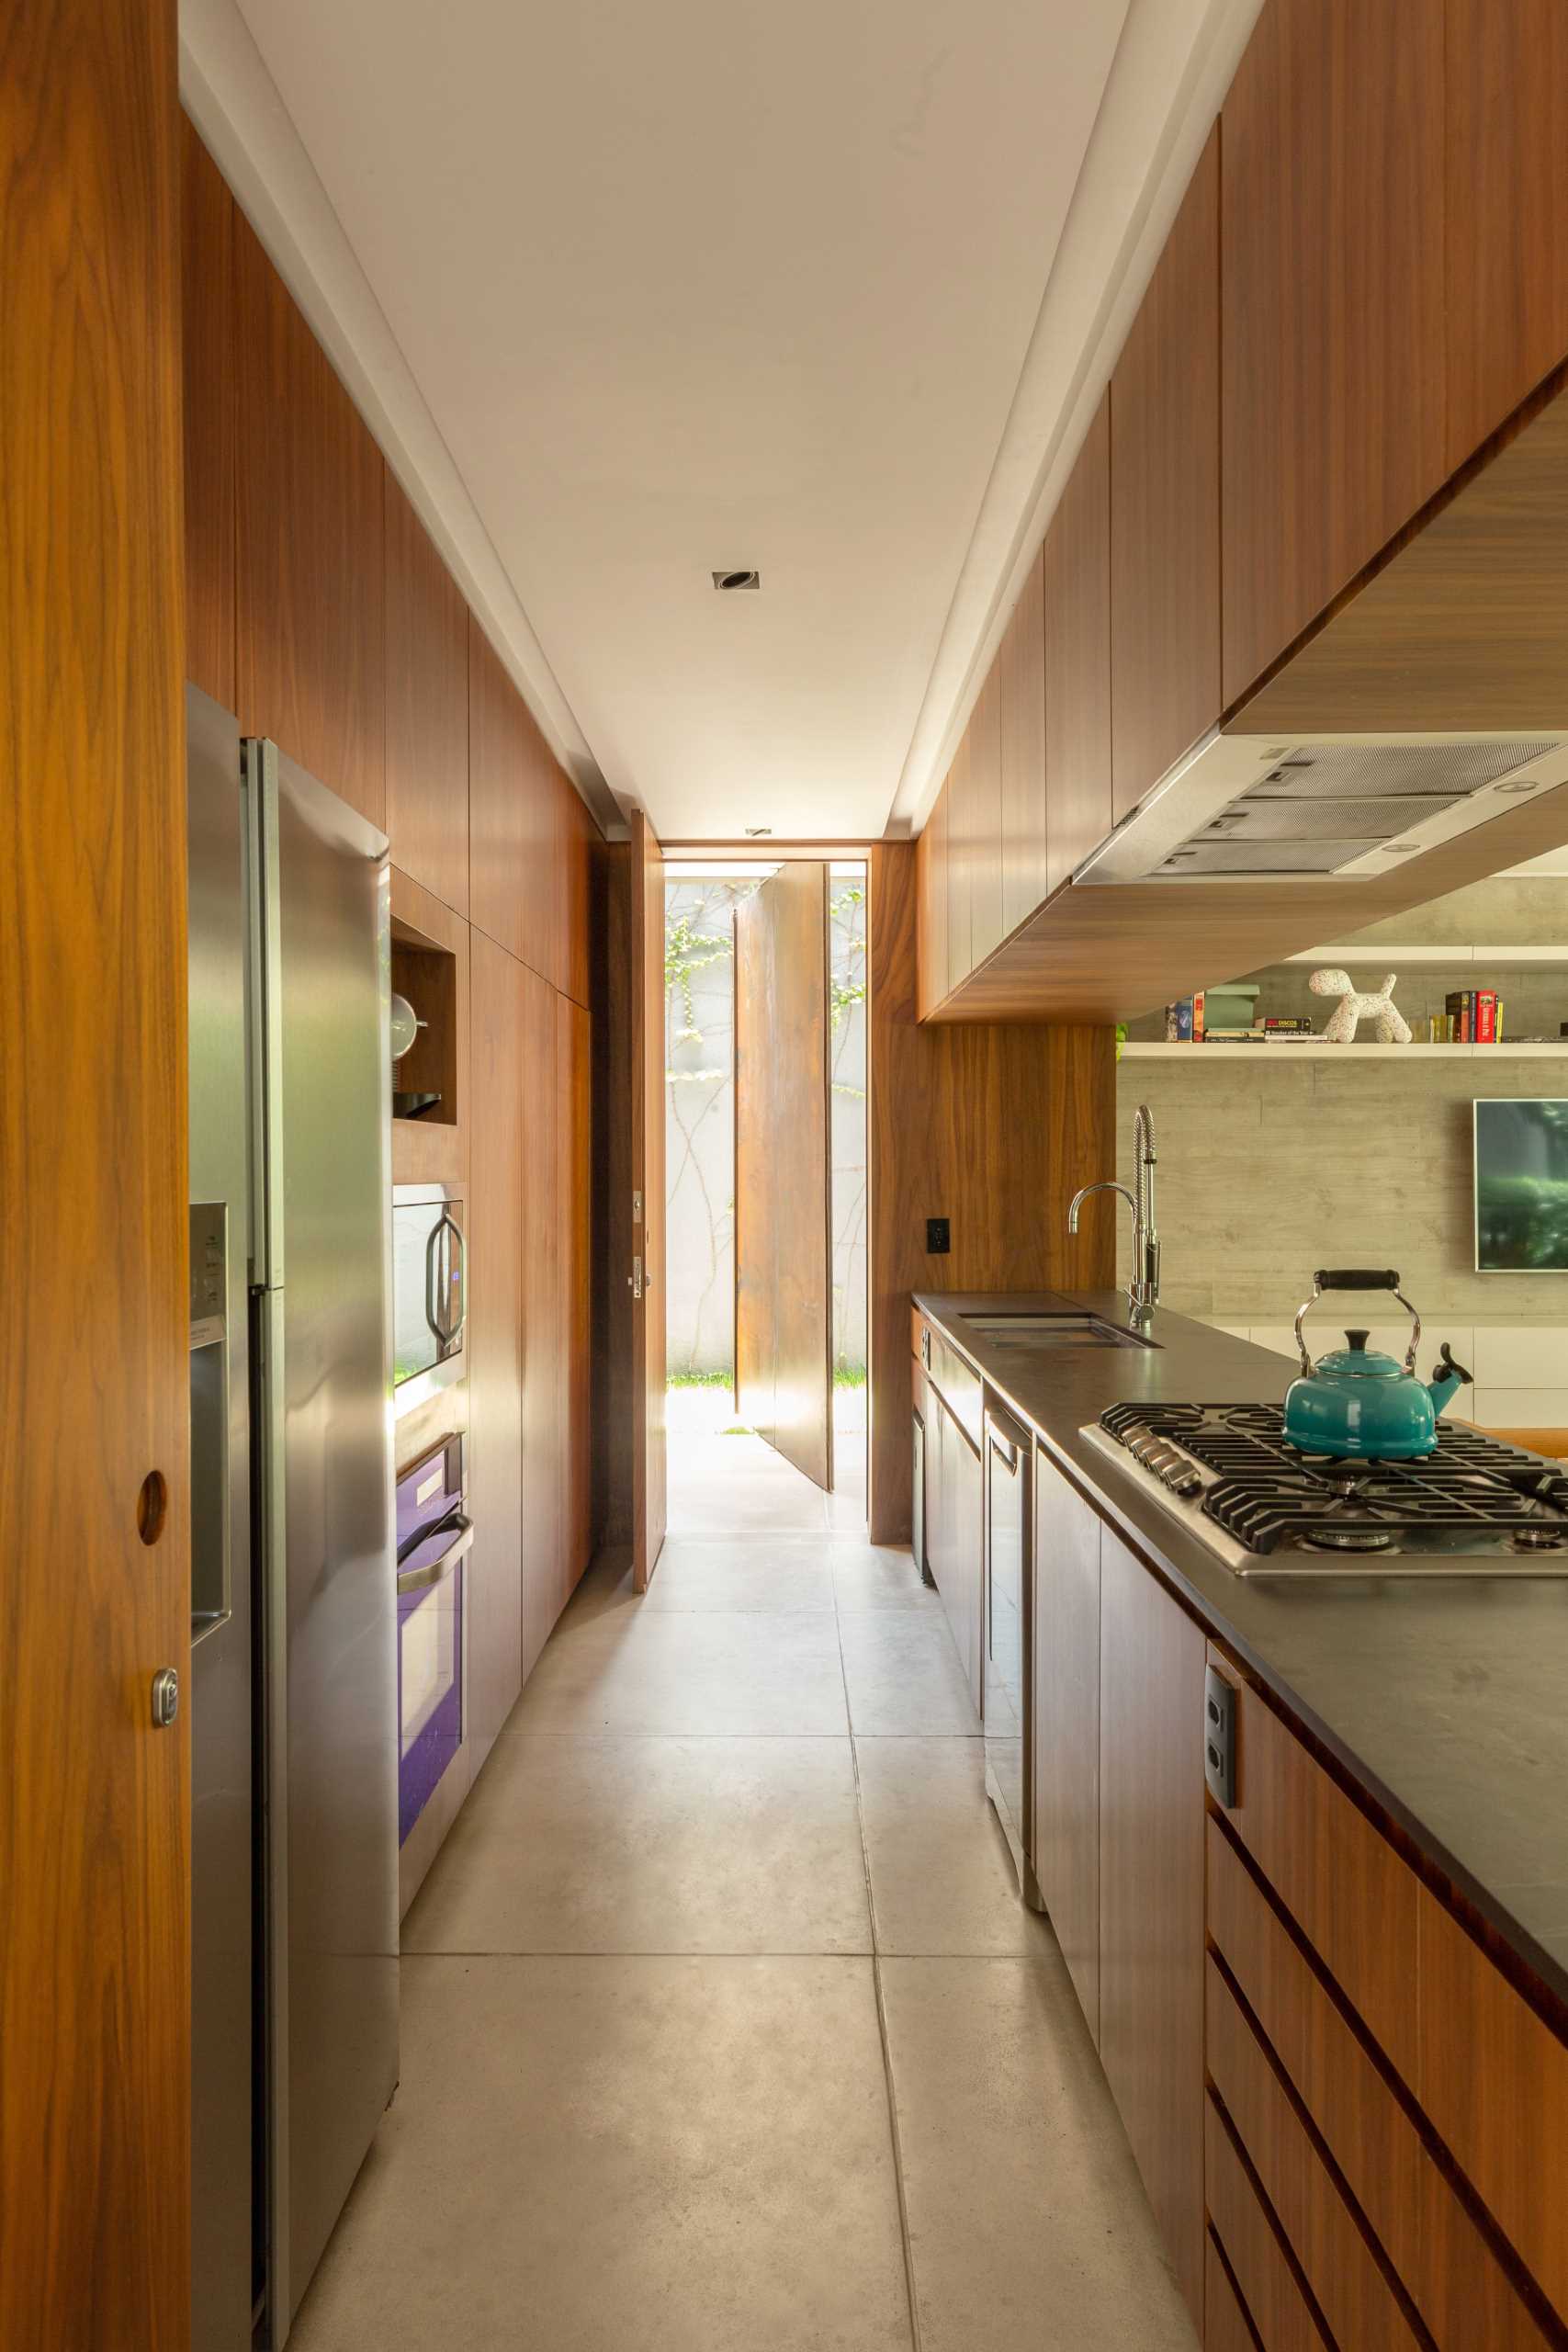 A narrow kitchen includes hardware free wood cabinets.